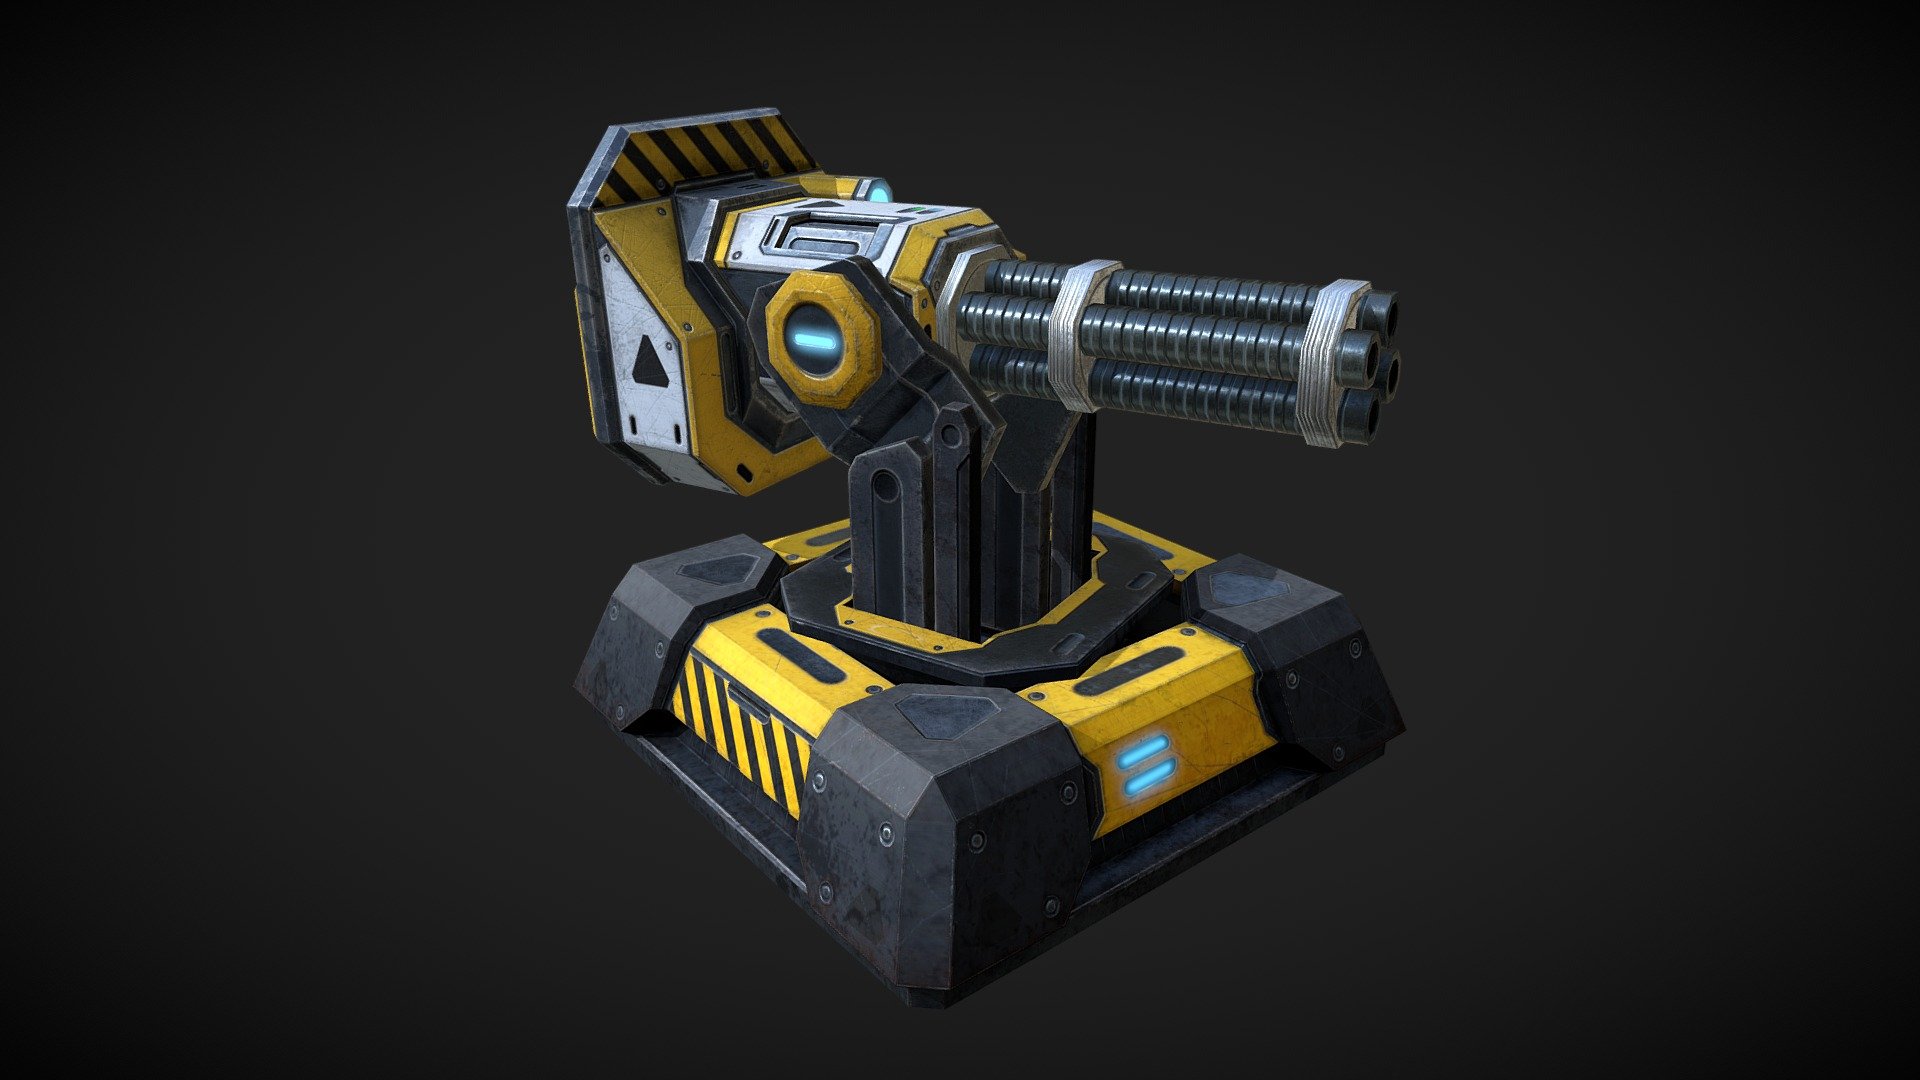 Animations: 
Close_Idle 0-3 
Open 3-33 
Open_Idle 33-36 
Attake 36-67 
Idle 67-167 
Close 167-200

Uses the same textures with:

https://sketchfab.com/3d-models/turret-artillery-162e198c59fb40c99af8422400c588d4
https://sketchfab.com/3d-models/turret-rocket-launch-8ef7d269617249c3b039f3a96c2ce295 - Turret Minigun - 3D model by Lekalo (@lekaloable) 3d model